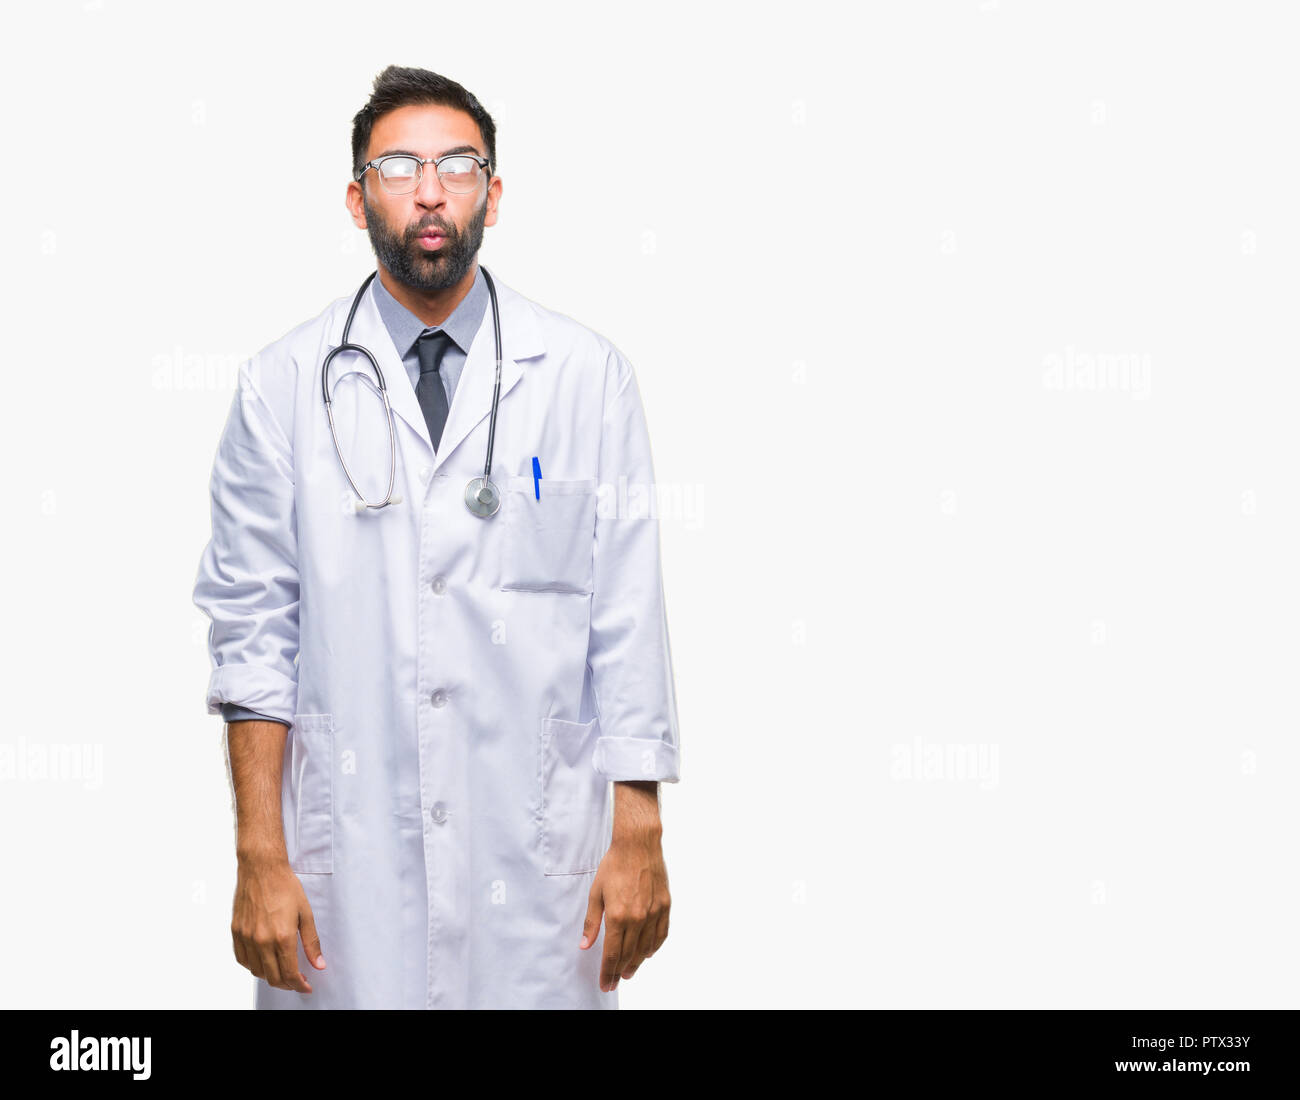 Male doctor making funny faces Cut Out Stock Images & Pictures - Alamy